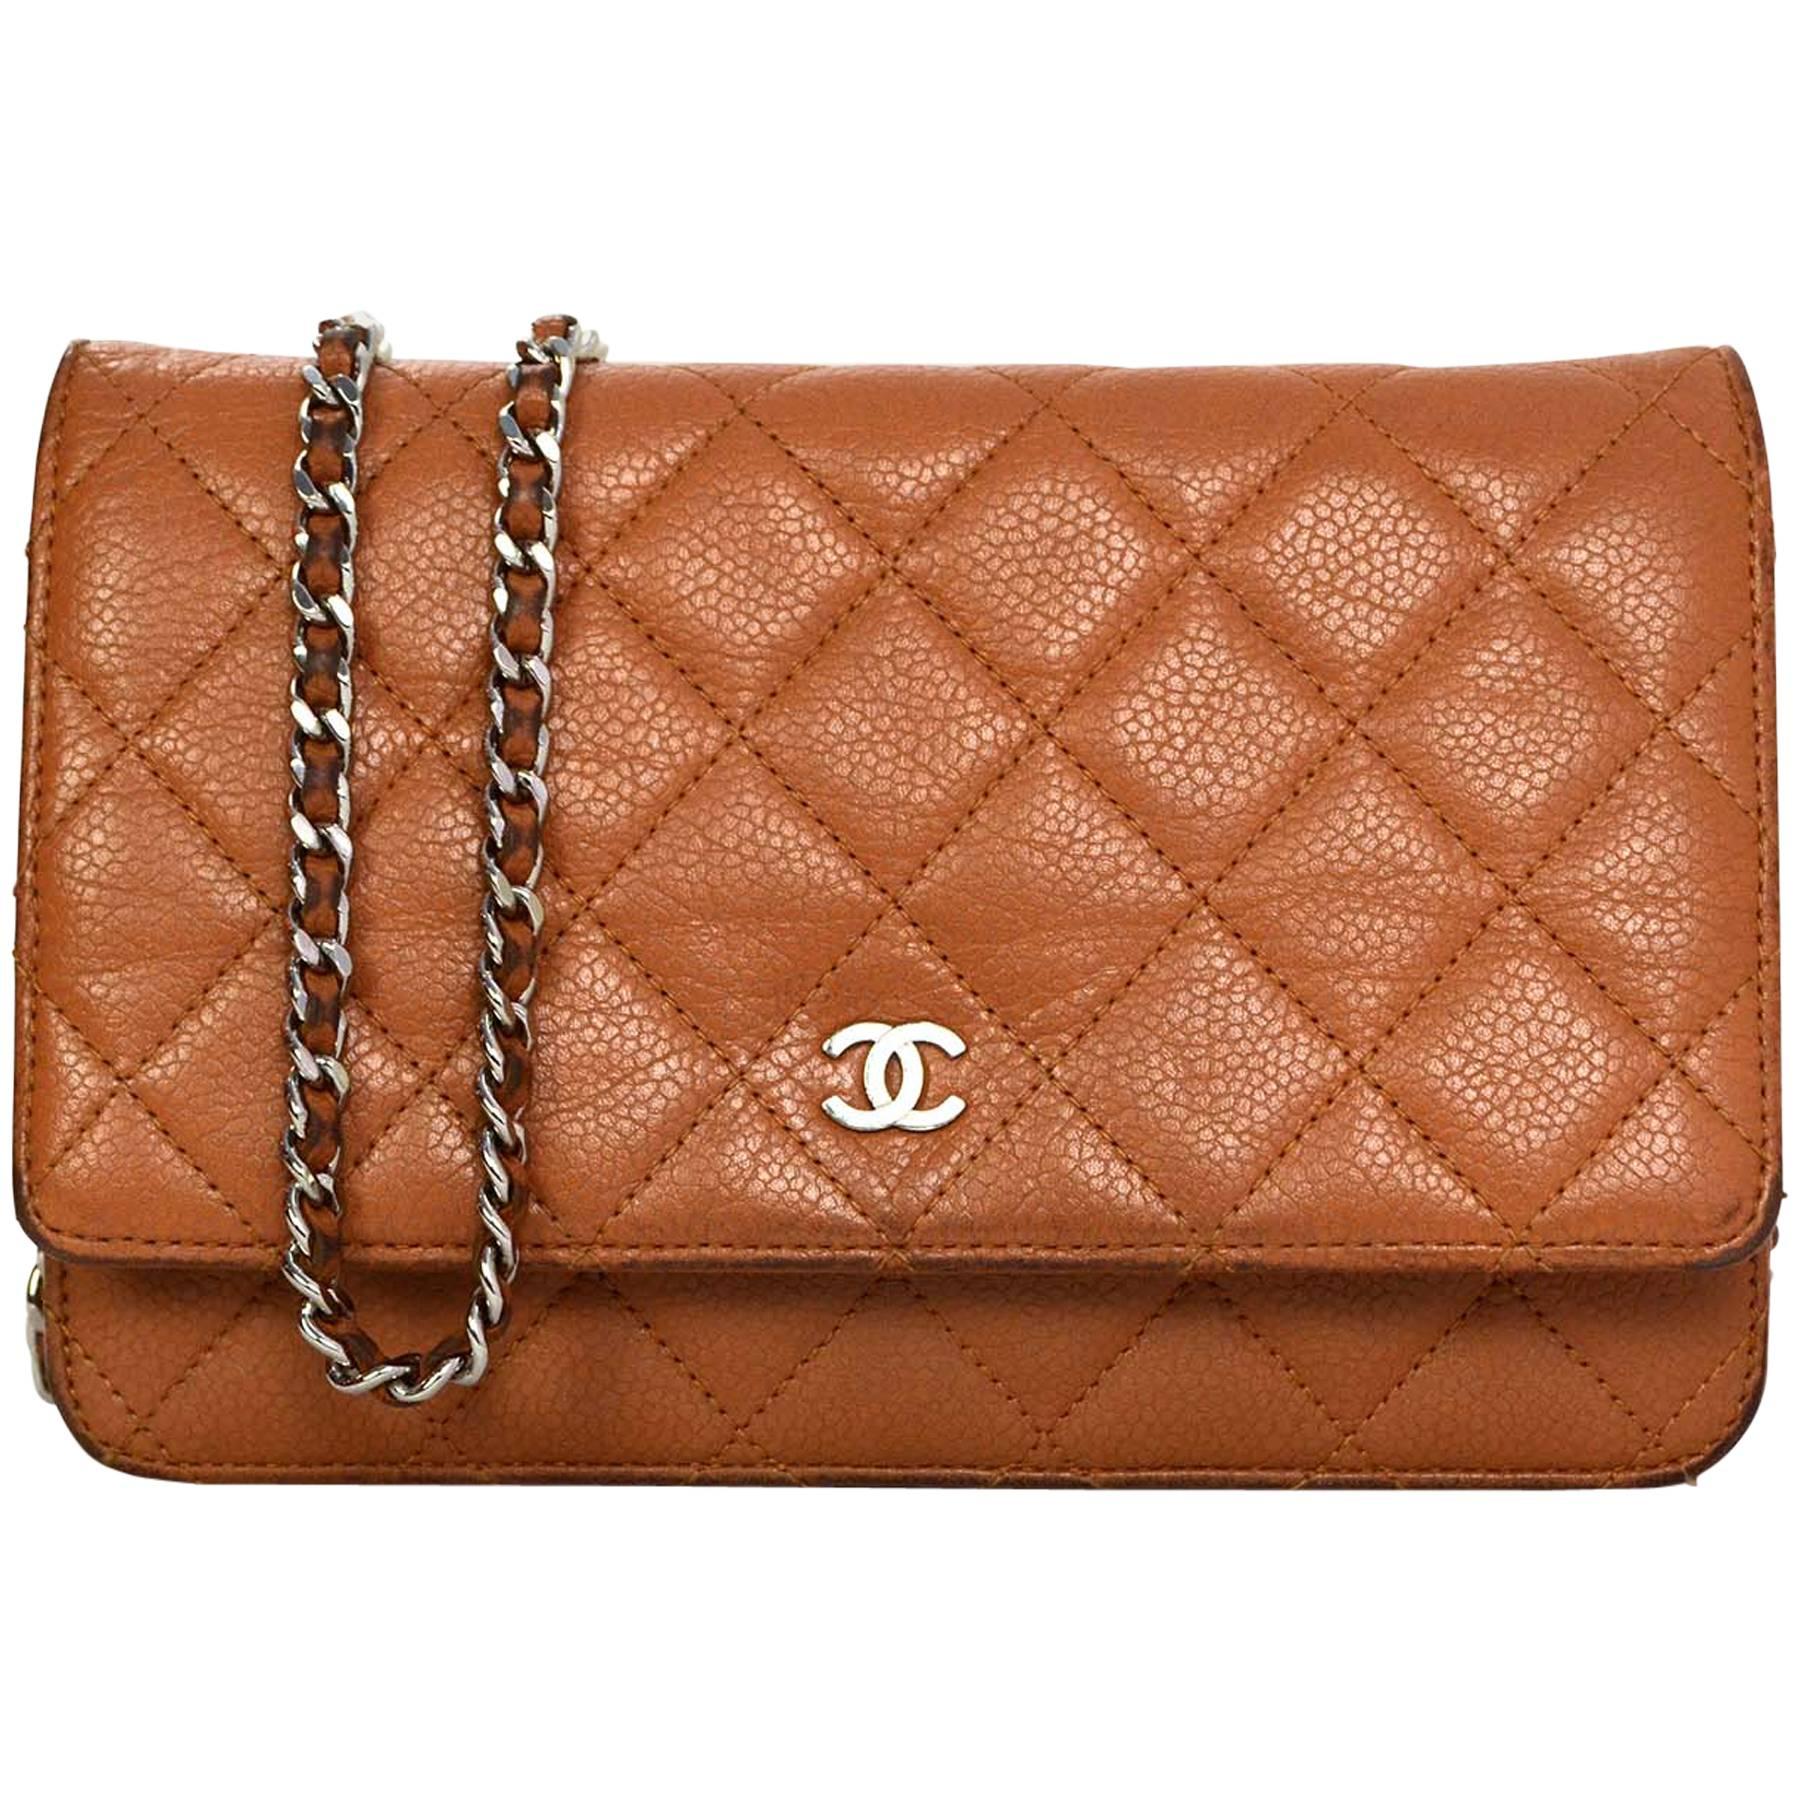 Chanel Tan Caviar Wallet on Chain WOC with SHW